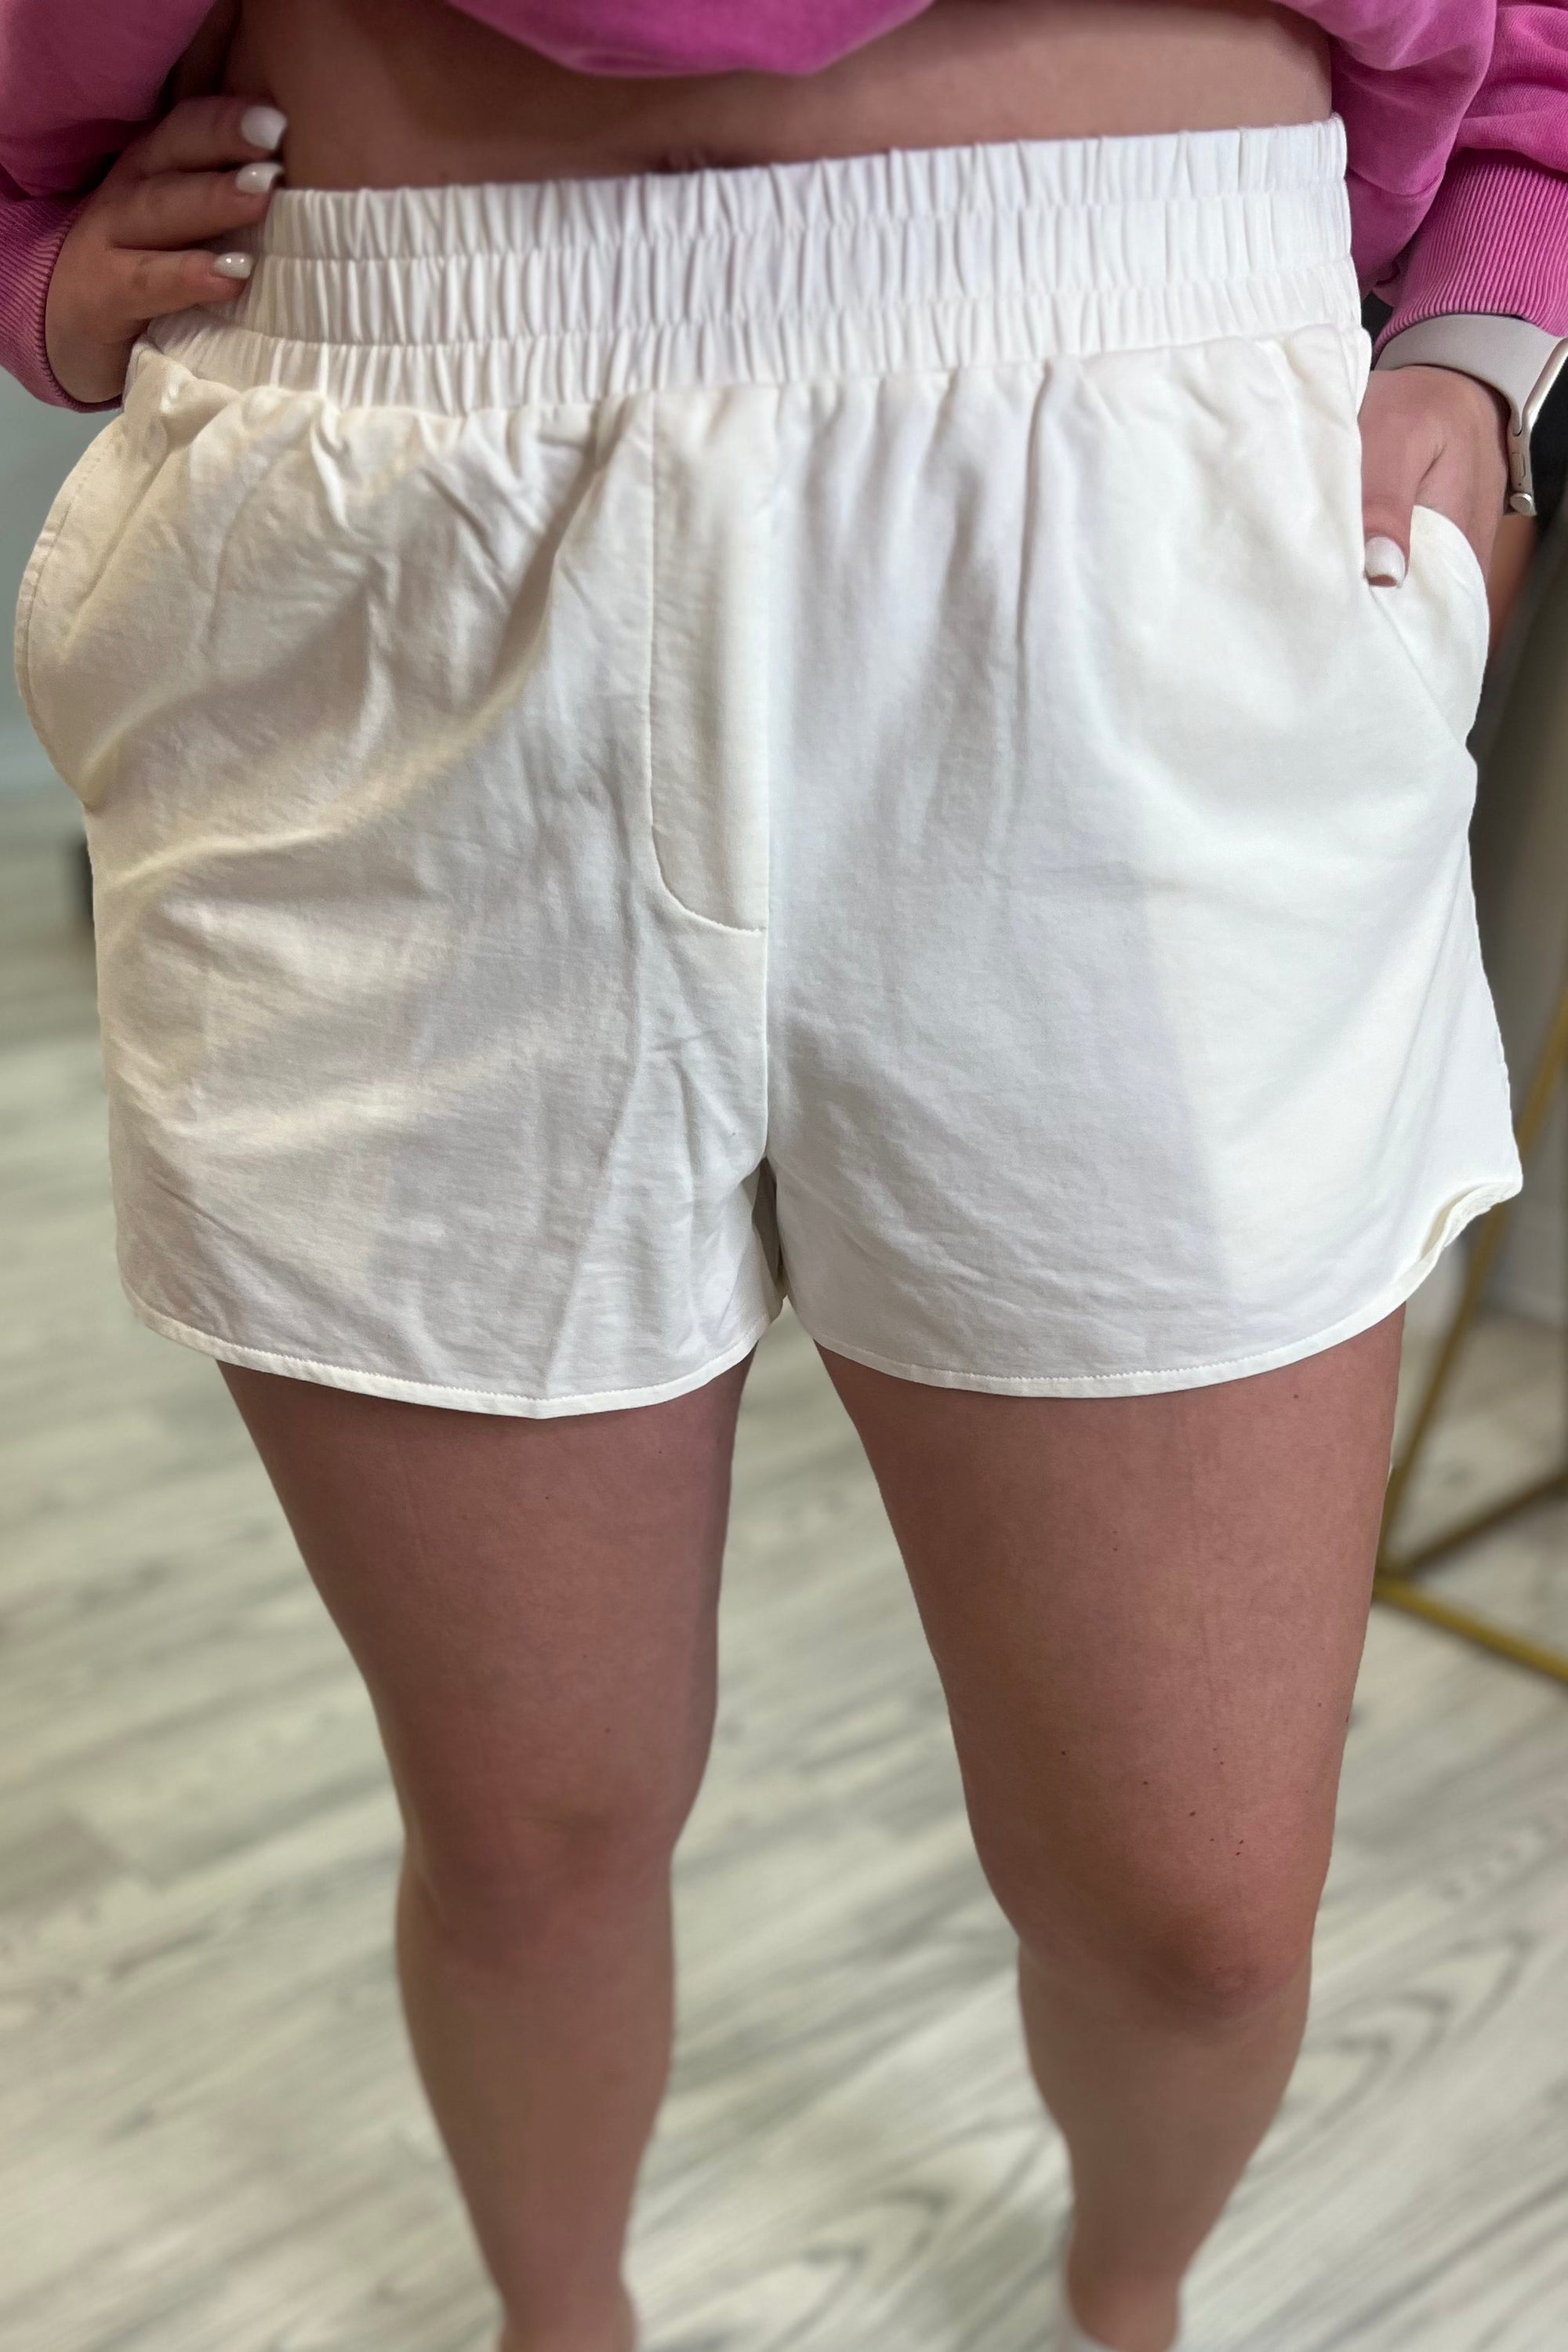 Relaxed Shorts BOTTOMS K Lane's & Co. CPGN S 